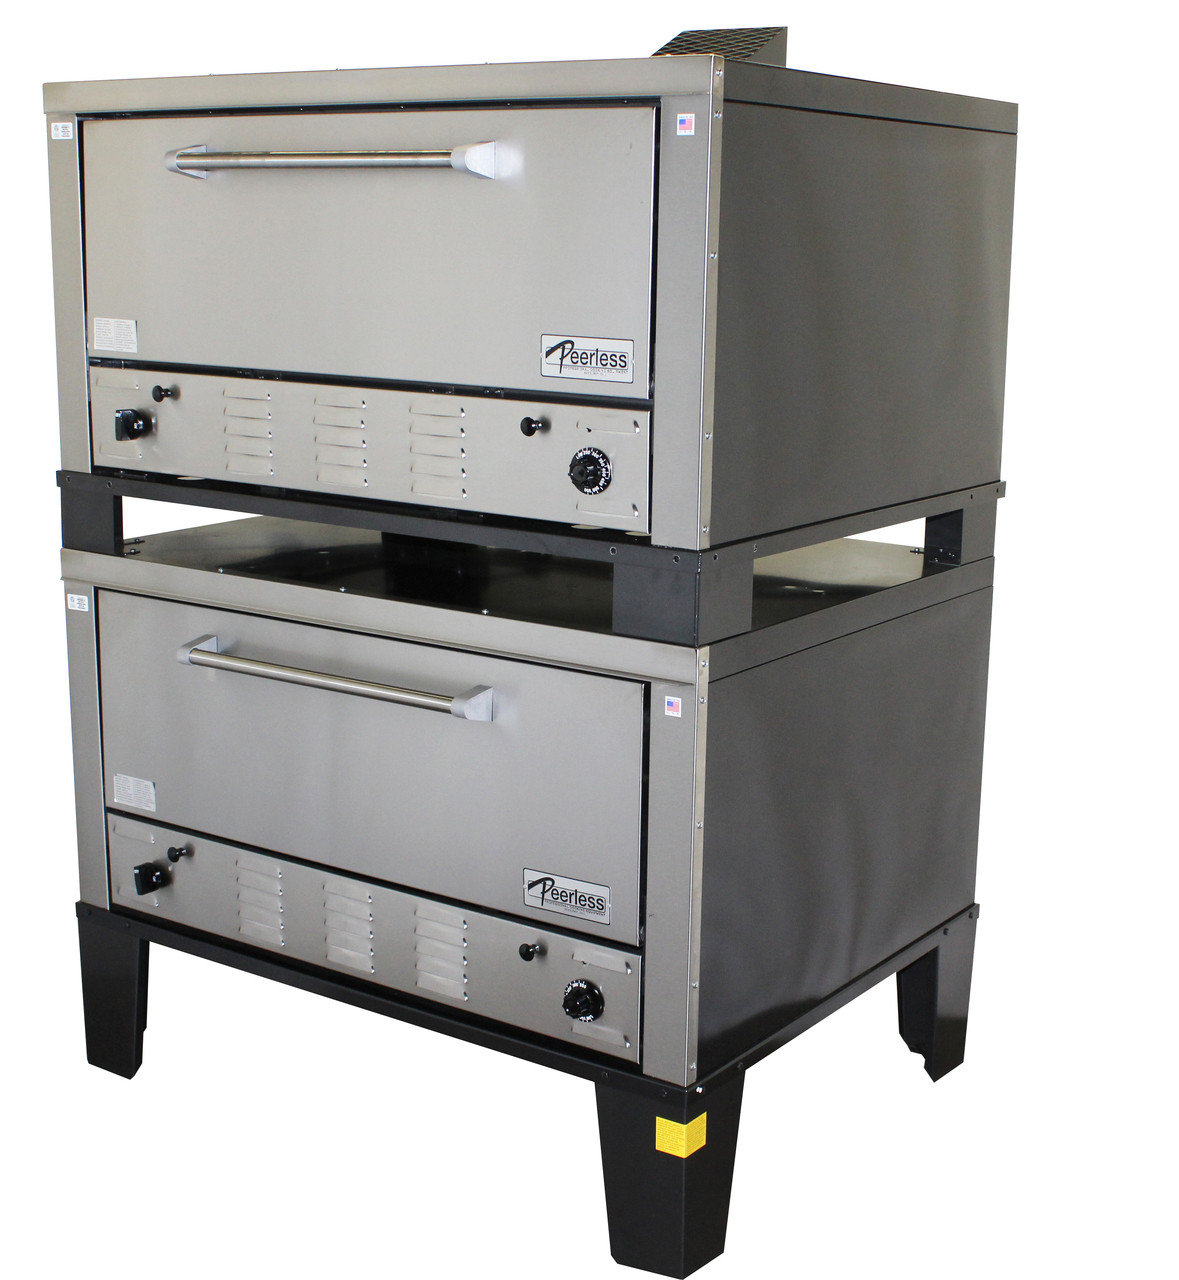 Double Deck Gas Oven, Size: Big/Large